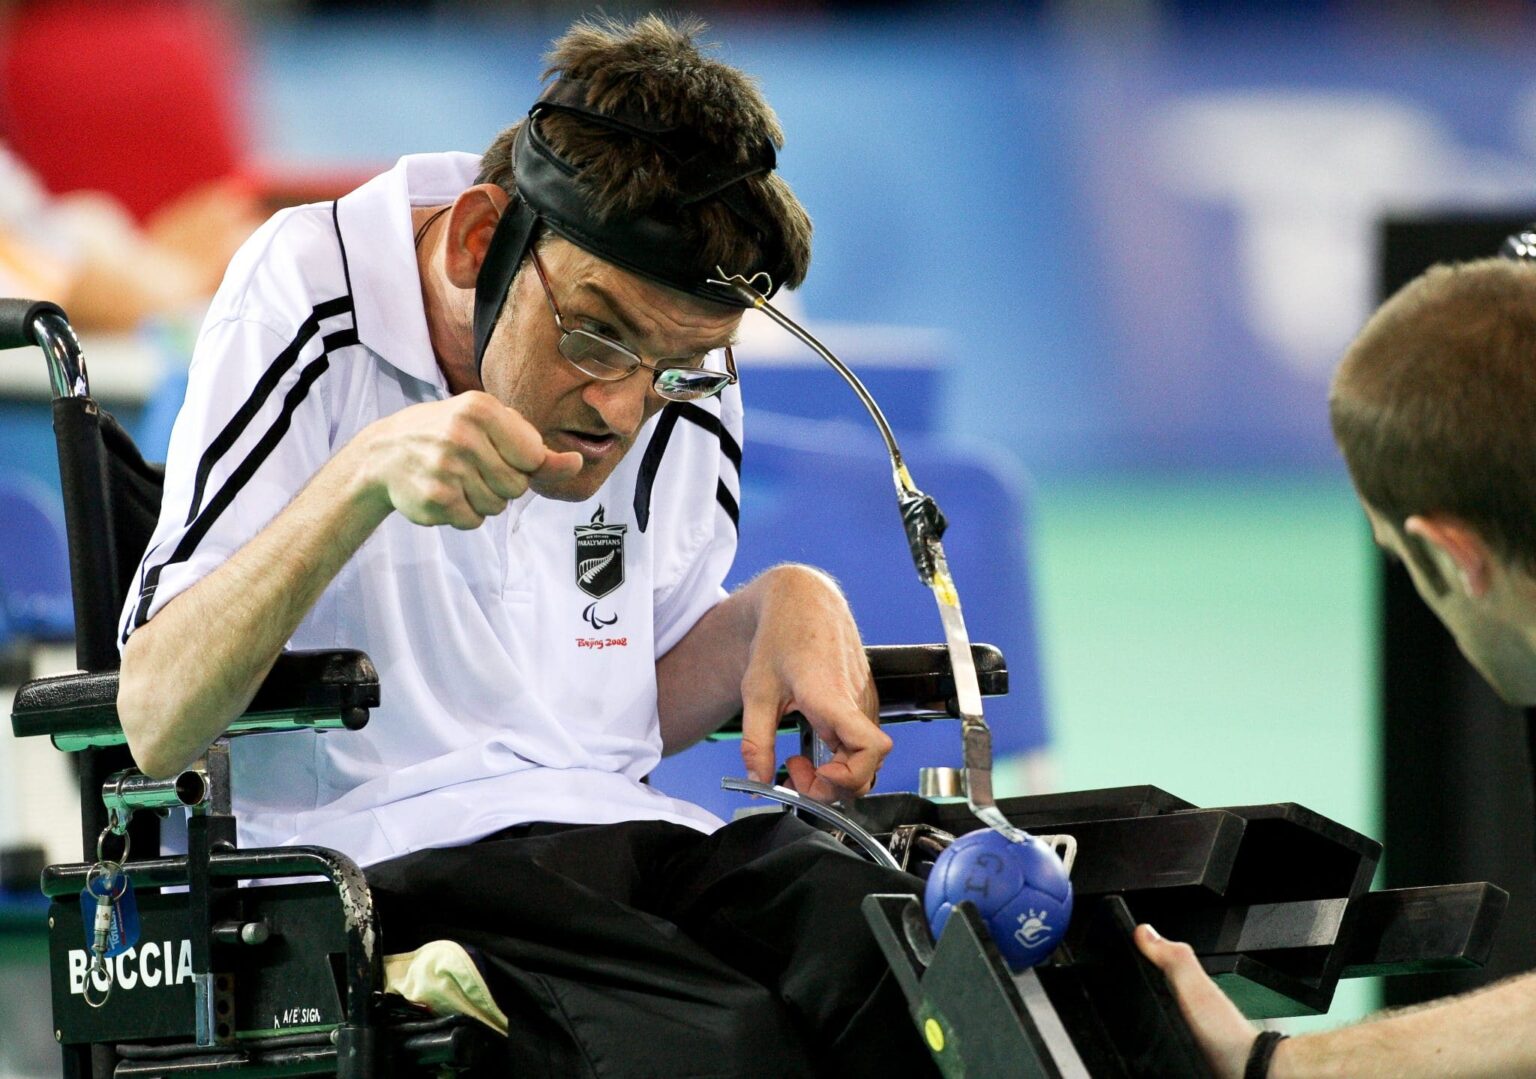 Greig Jackson concentrating to push his ball off the Boccia ramp at Beijing 2008